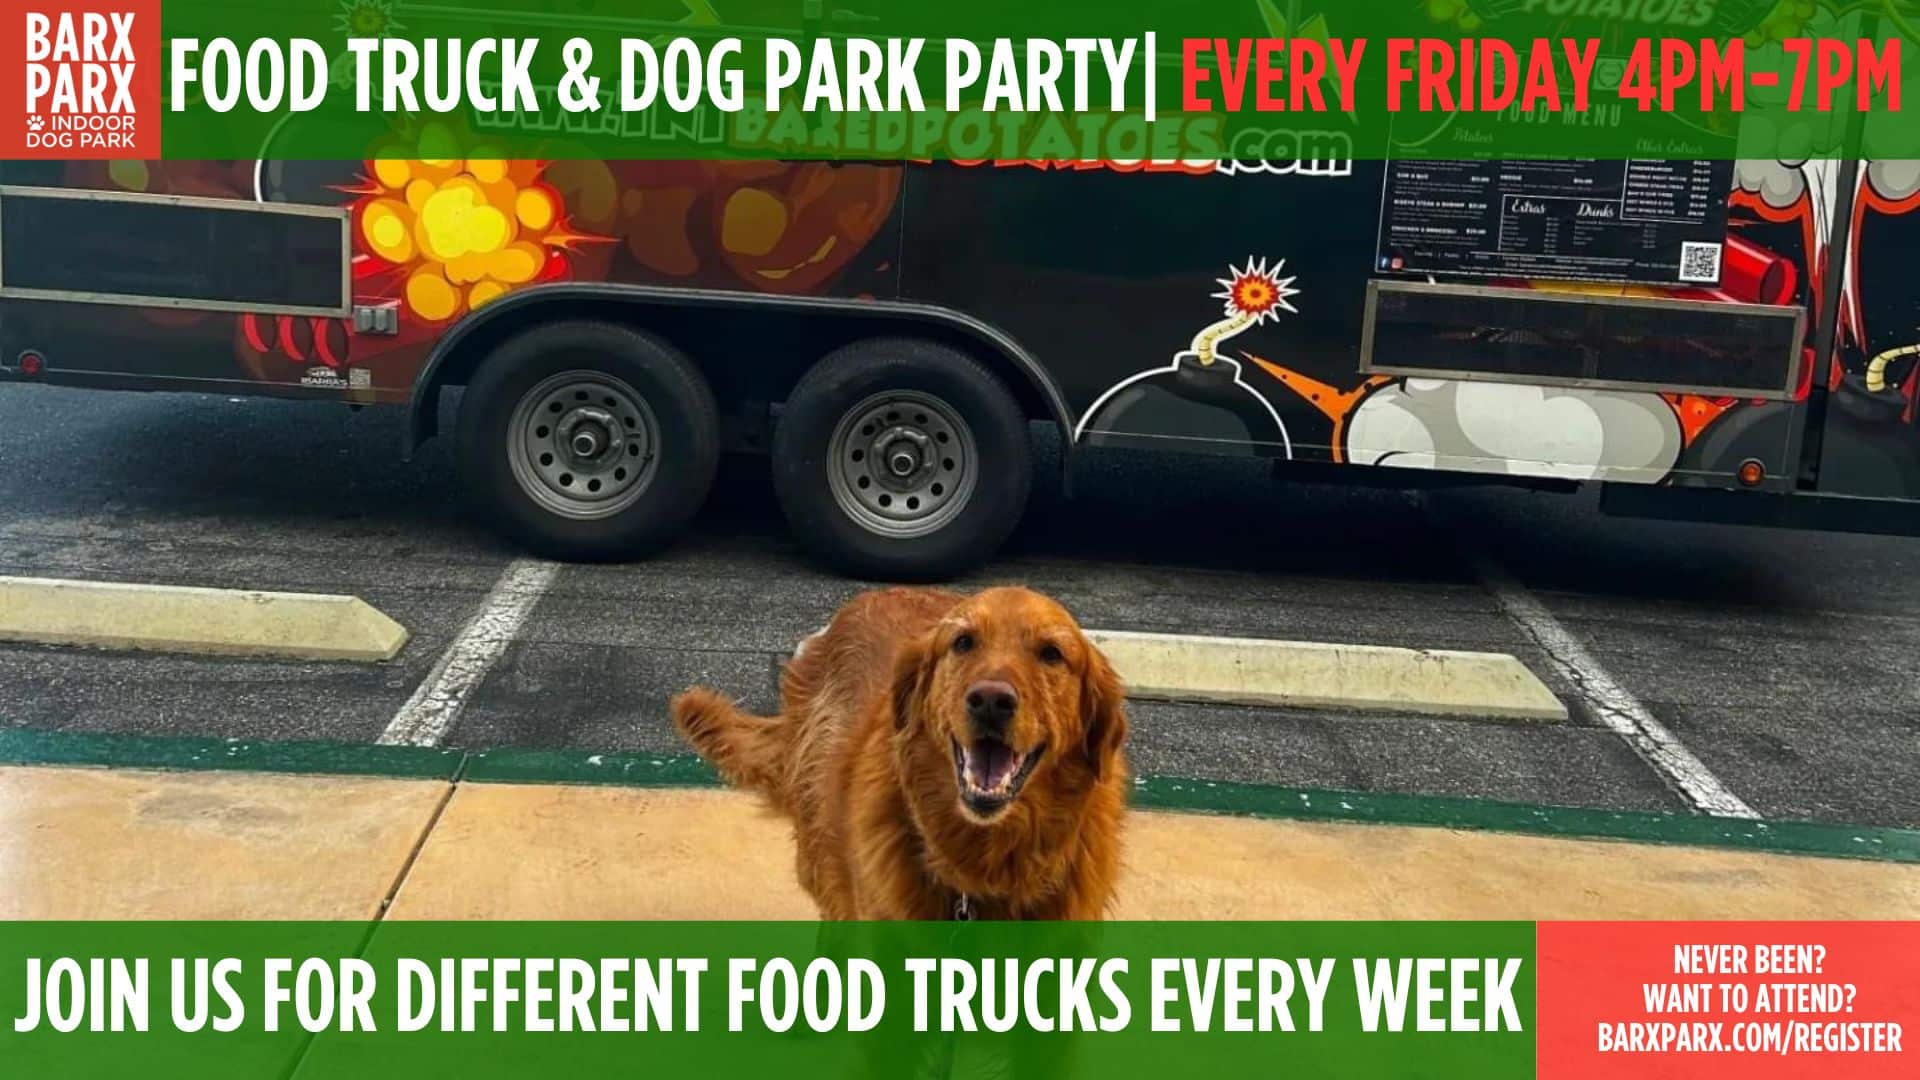 Food truck dog park party 4